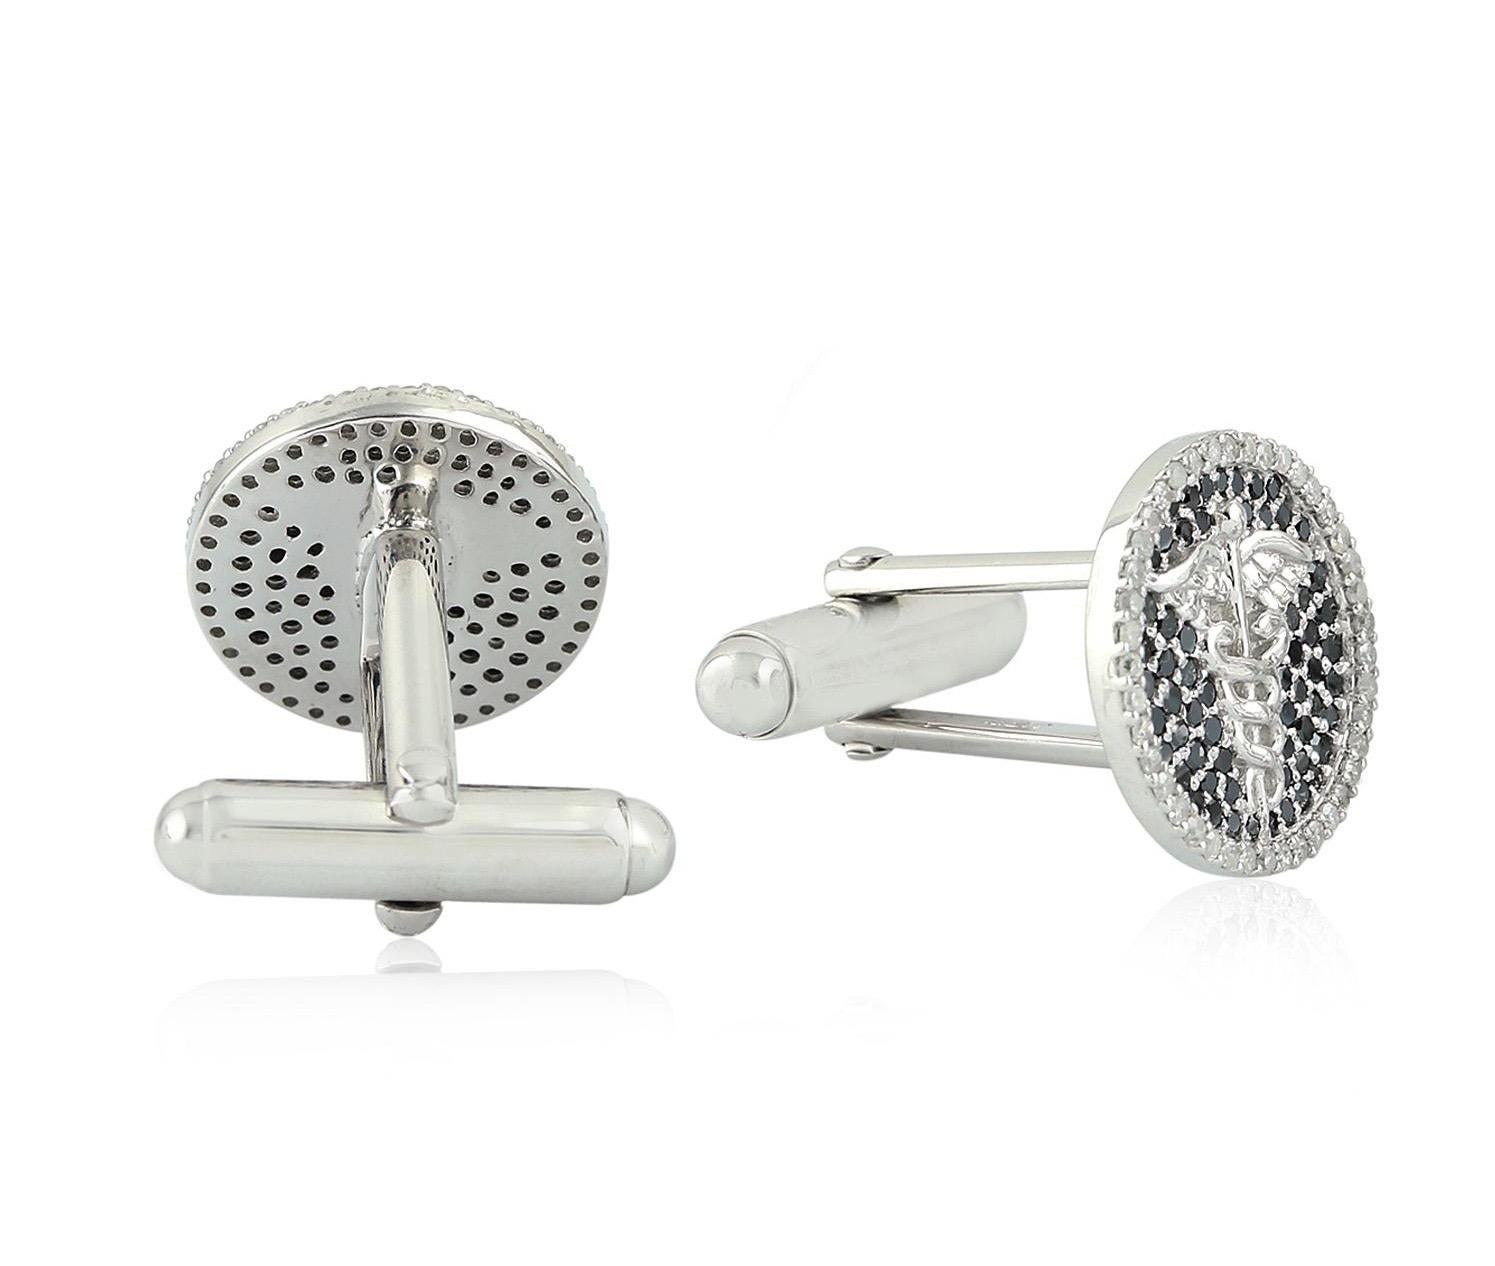 Cast from sterling silver, these cuff links are hand set with 1.13 carats black & white diamonds.

FOLLOW  MEGHNA JEWELS storefront to view the latest collection & exclusive pieces.  Meghna Jewels is proudly rated as a Top Seller on 1stdibs with 5